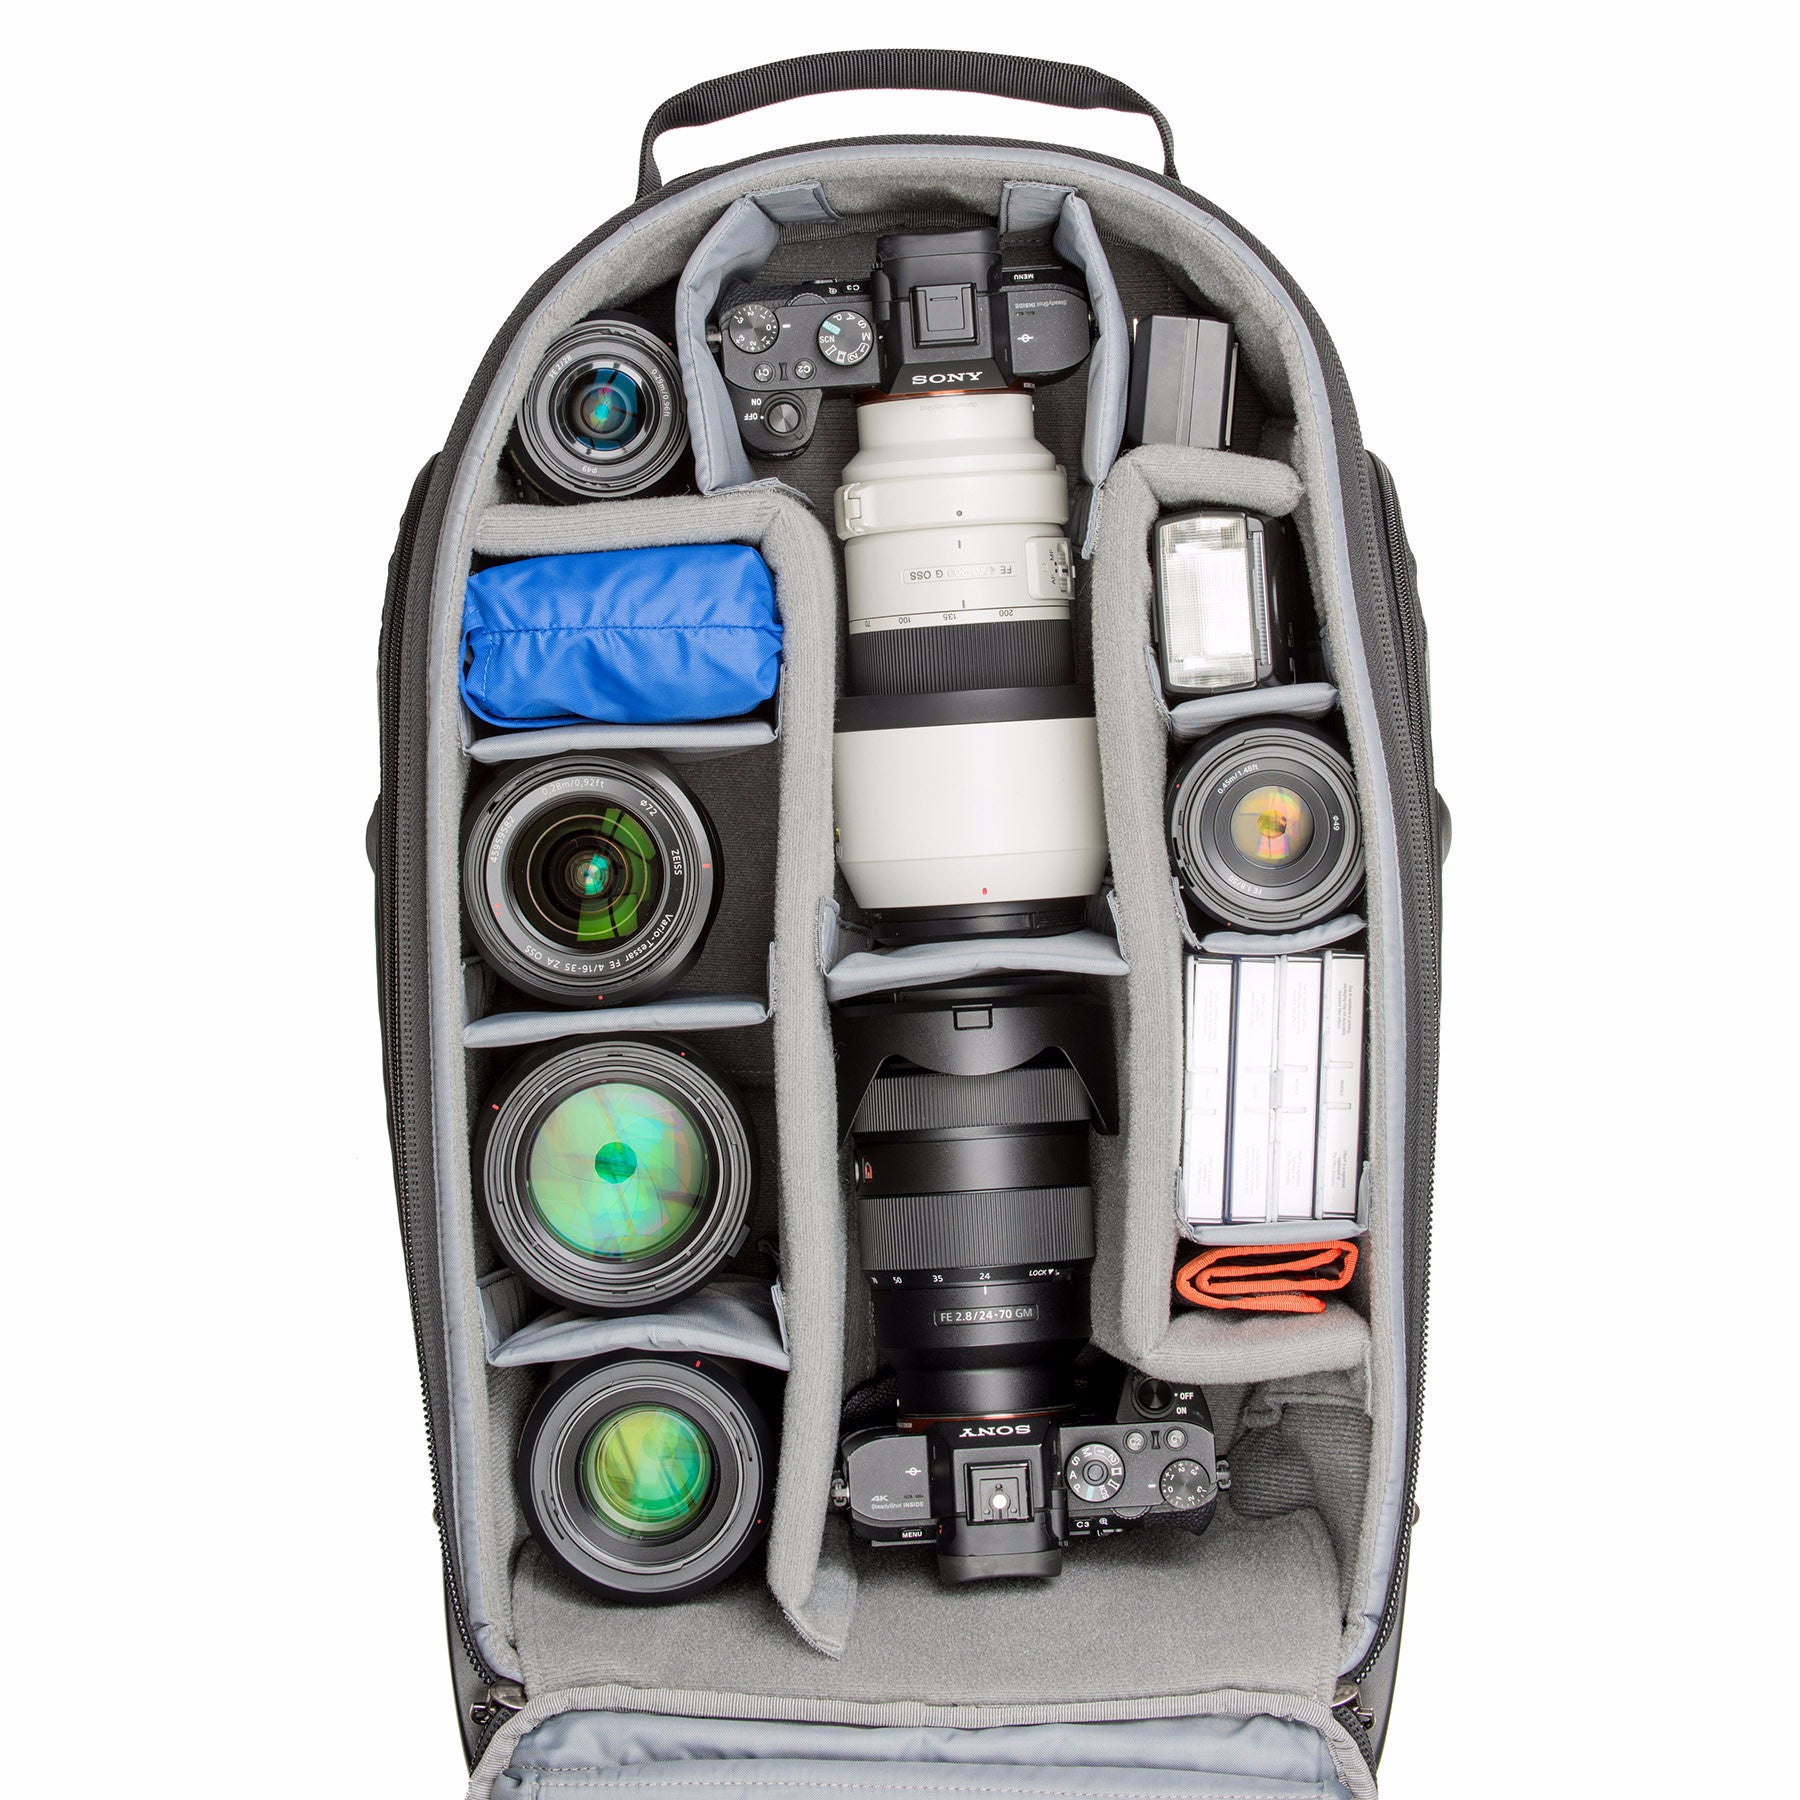 Fits two bodies with lenses attached including a 200–400mm f/4